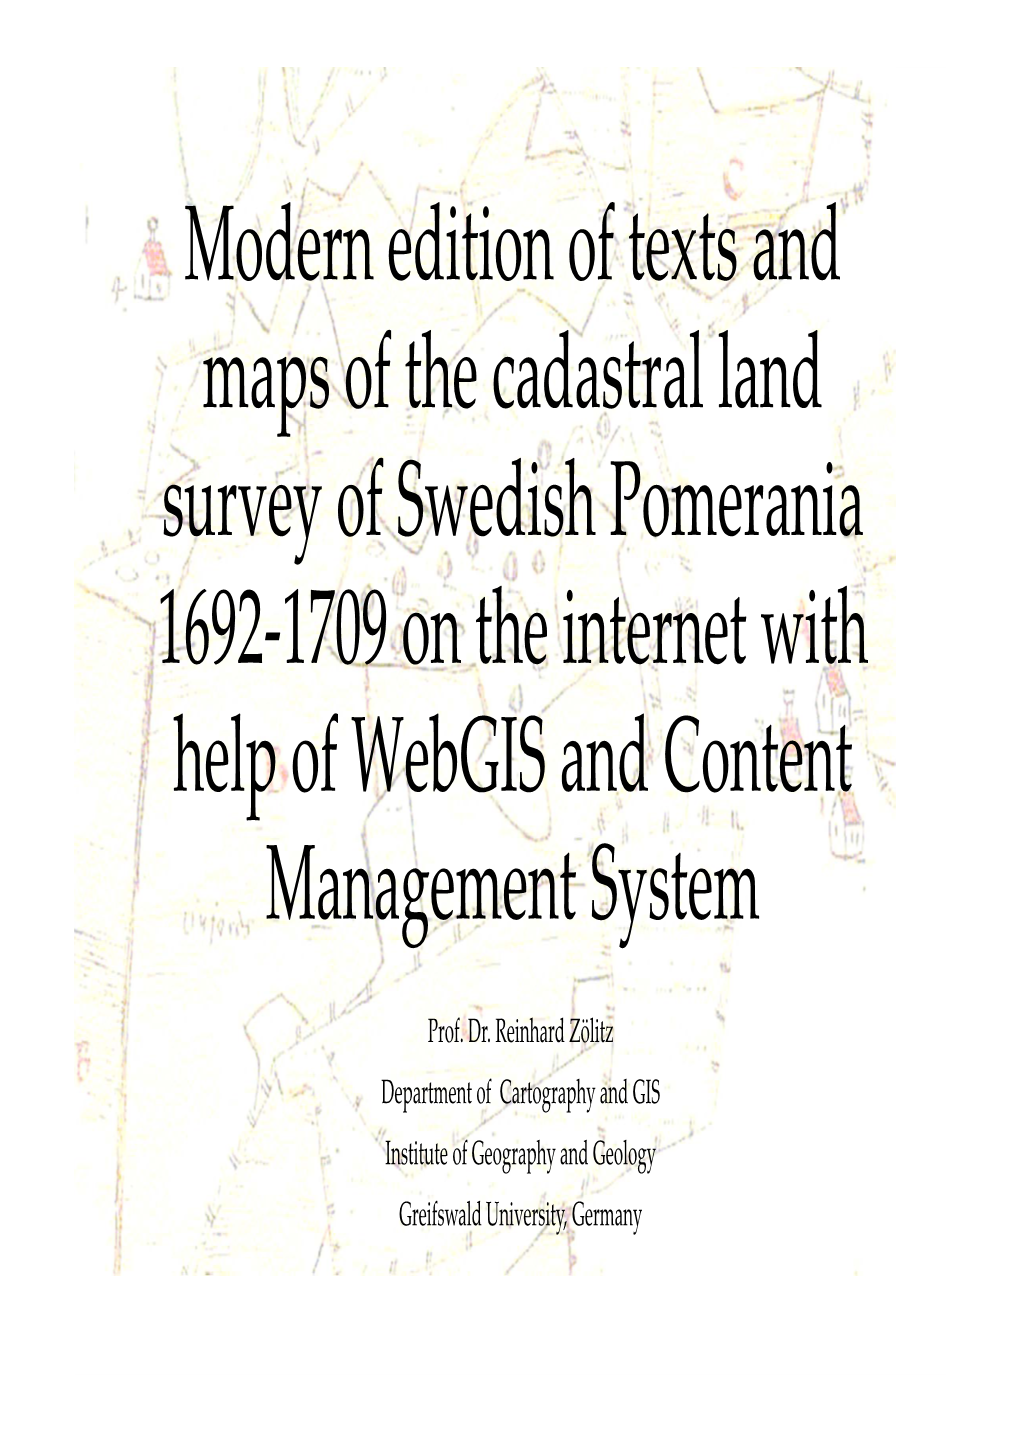 Land Survey of Swedish Pomerania 1692-1709 on the Internet with Help of Webgis and Content Management System